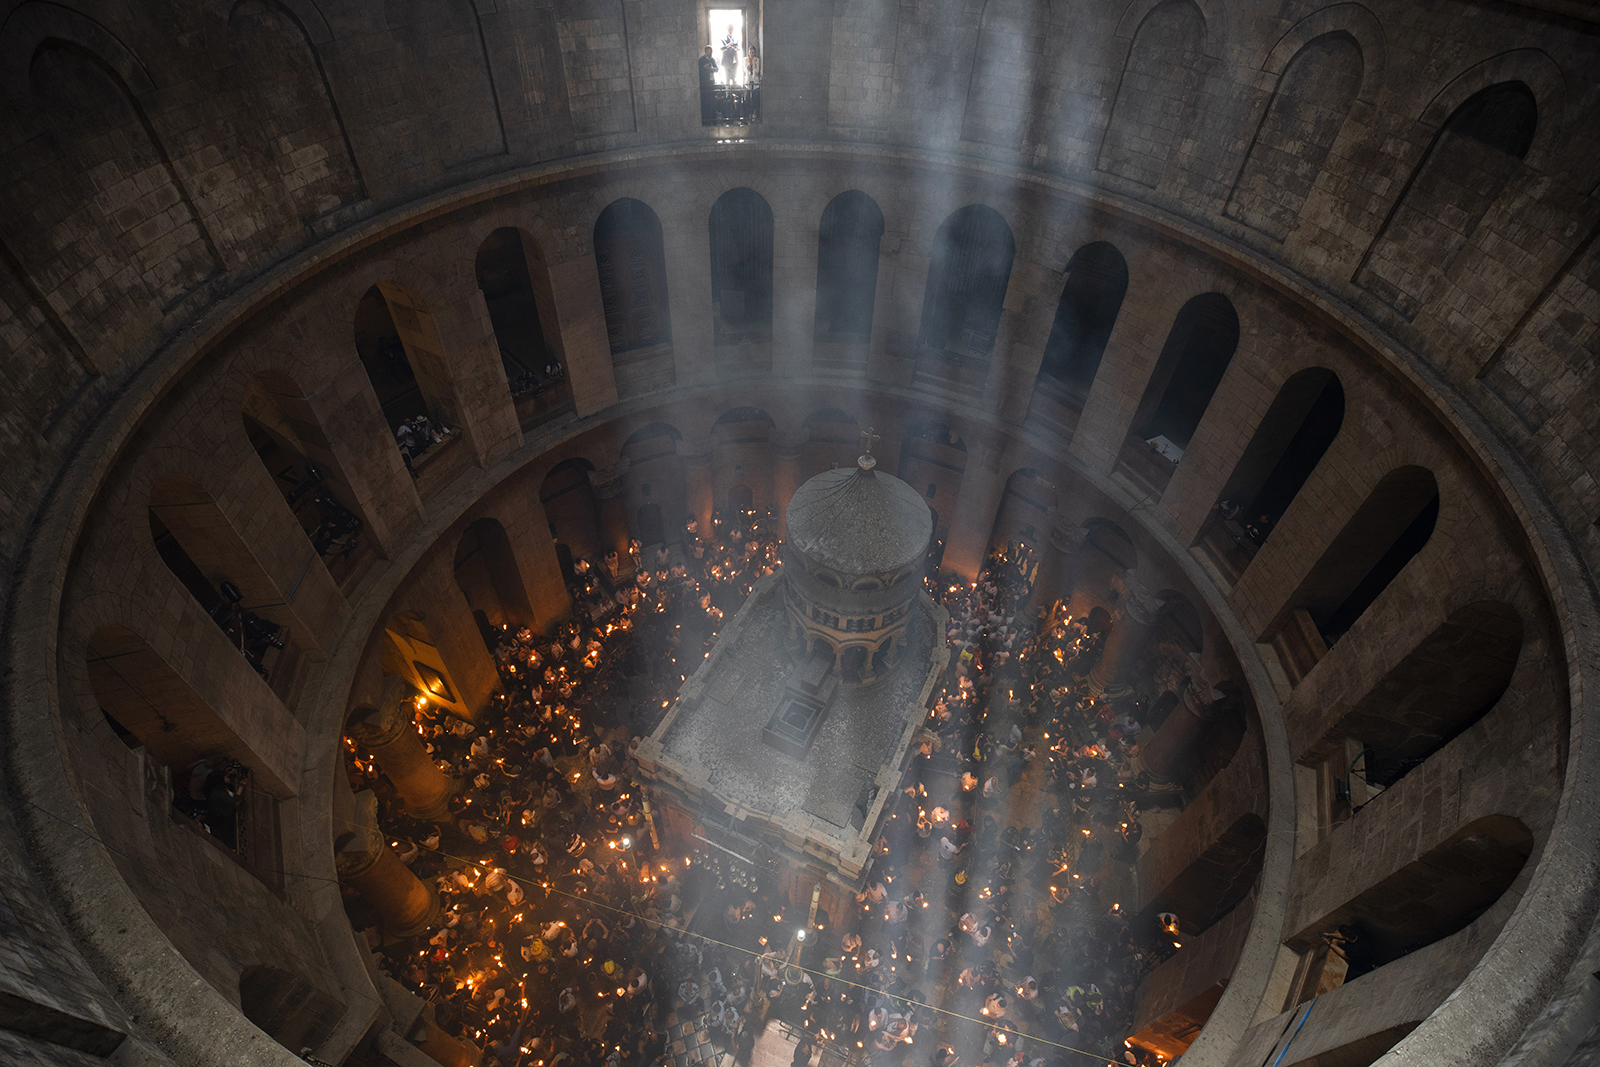 Christian pilgrims hold candles as they gather during the ceremony of the Holy Fire at Church of the Holy Sepulchre, where many Christians believe Jesus was crucified, buried and rose from the dead, in the Old City of Jerusalem, Saturday, May 1, 2021. Thousands of Christians have gathered in Jerusalem for the ancient fire ceremony that celebrates Jesus' resurrection. (AP Photo/Oded Balilty)